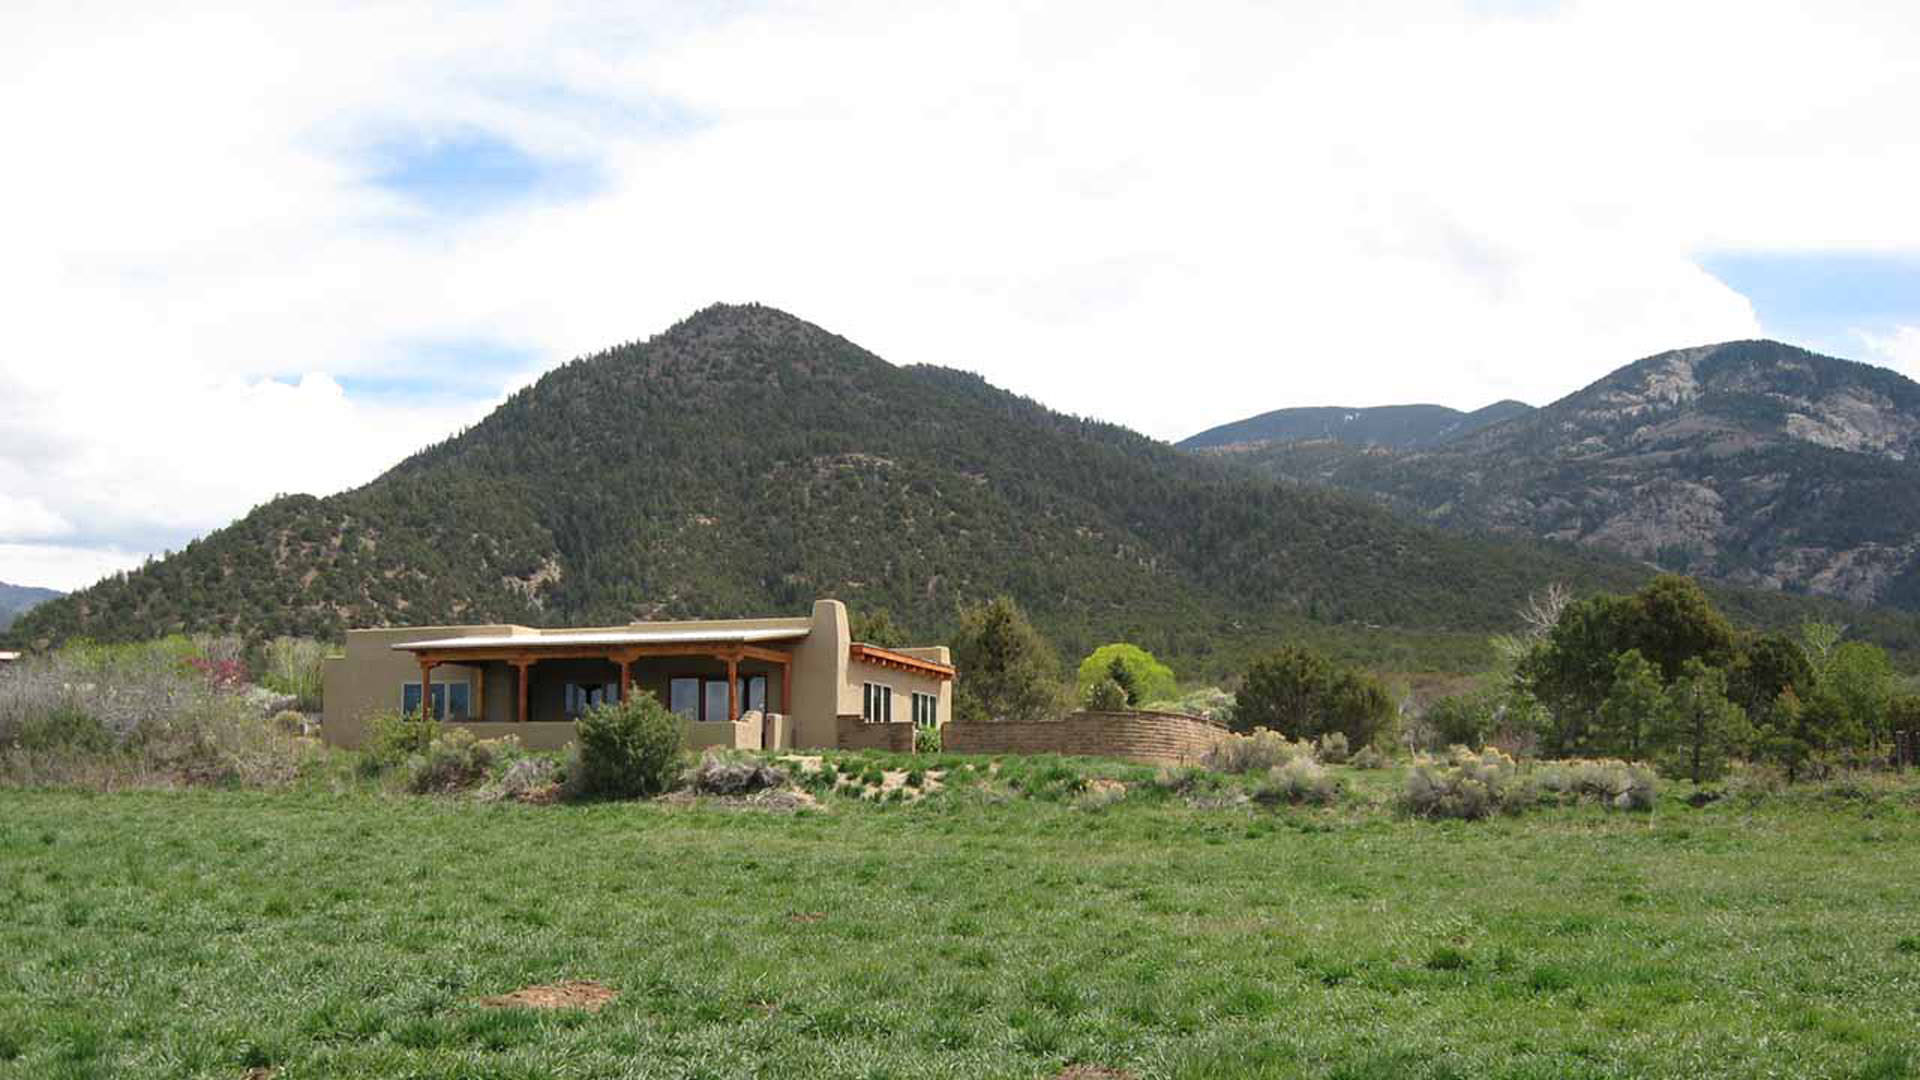 Taos Real Estate and Taos Homes For Sale